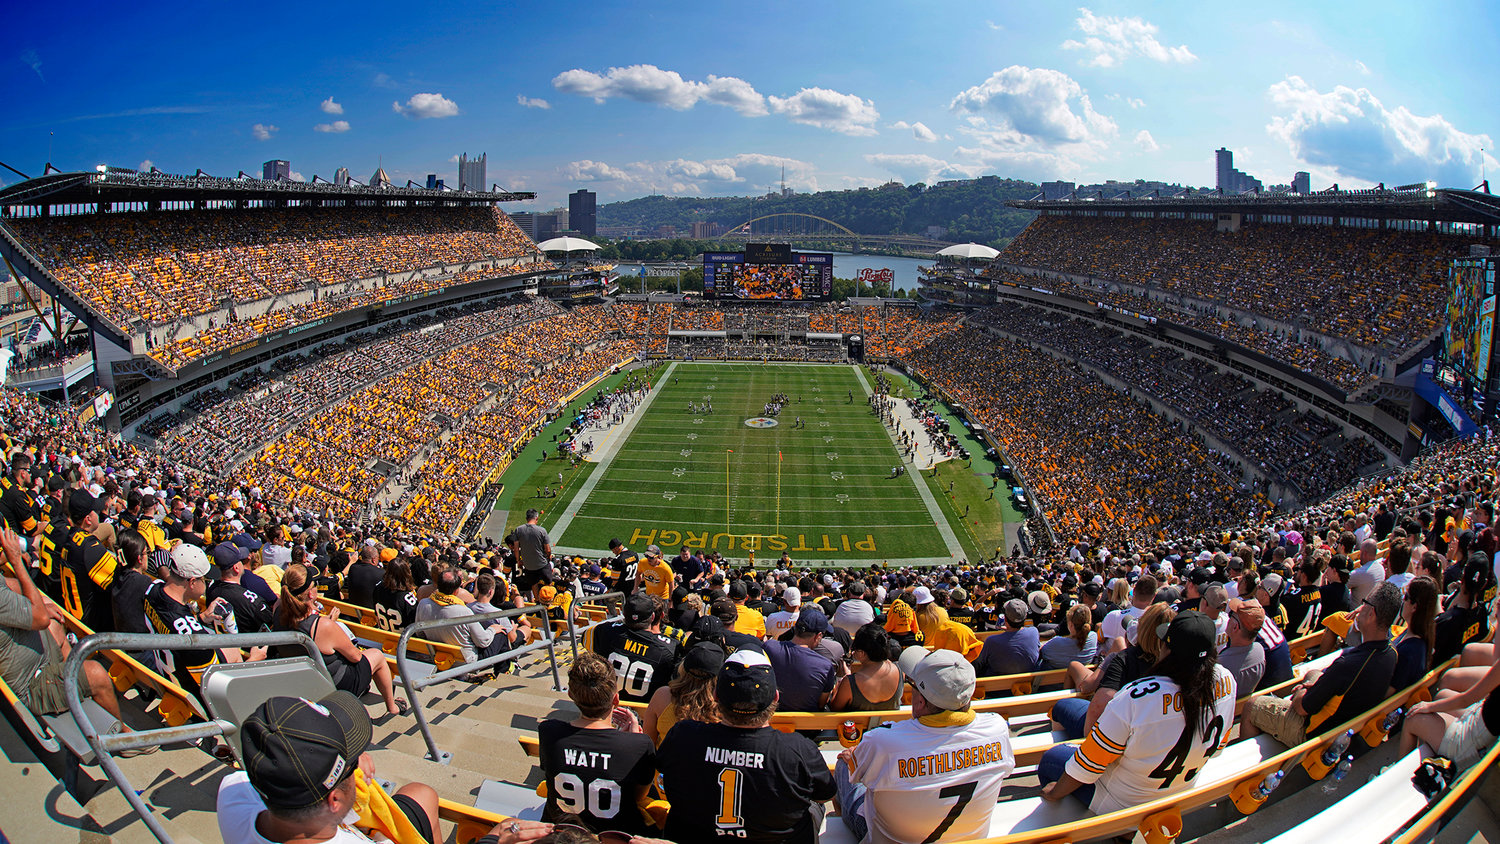 The Pittsburgh Steelers face the New England Patriots during an NFL football game at Acrisure Stadium in Pittsburgh, Sunday, Sept. 18, 2022.